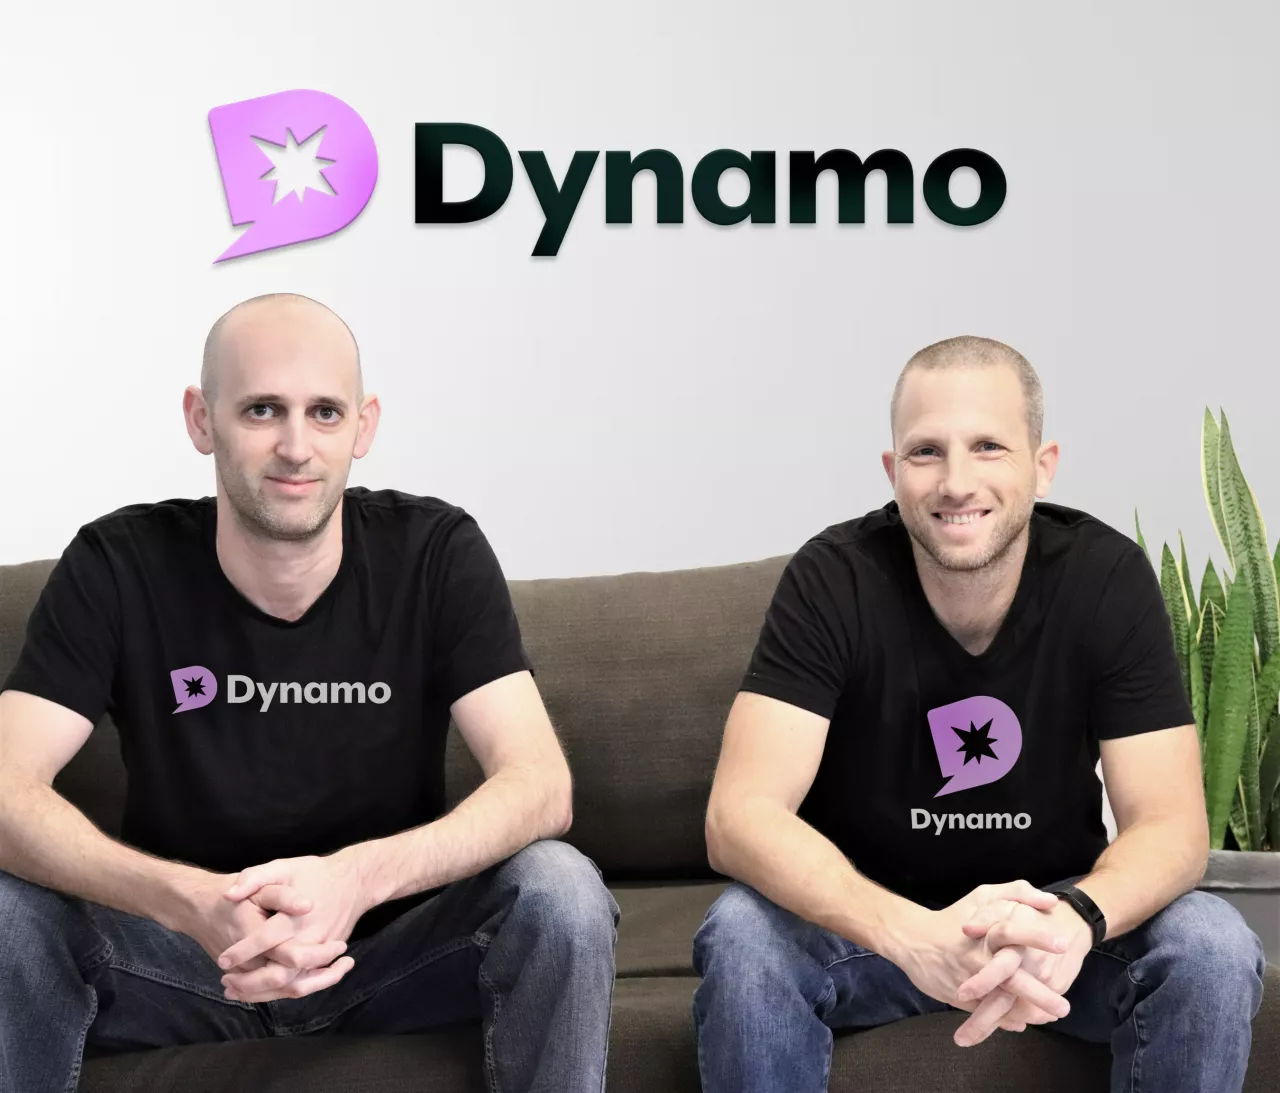 Dynamo Unveils Revolutionary Social Conversion Enhancement Platform, Backed by Prominent Investors and Advisors